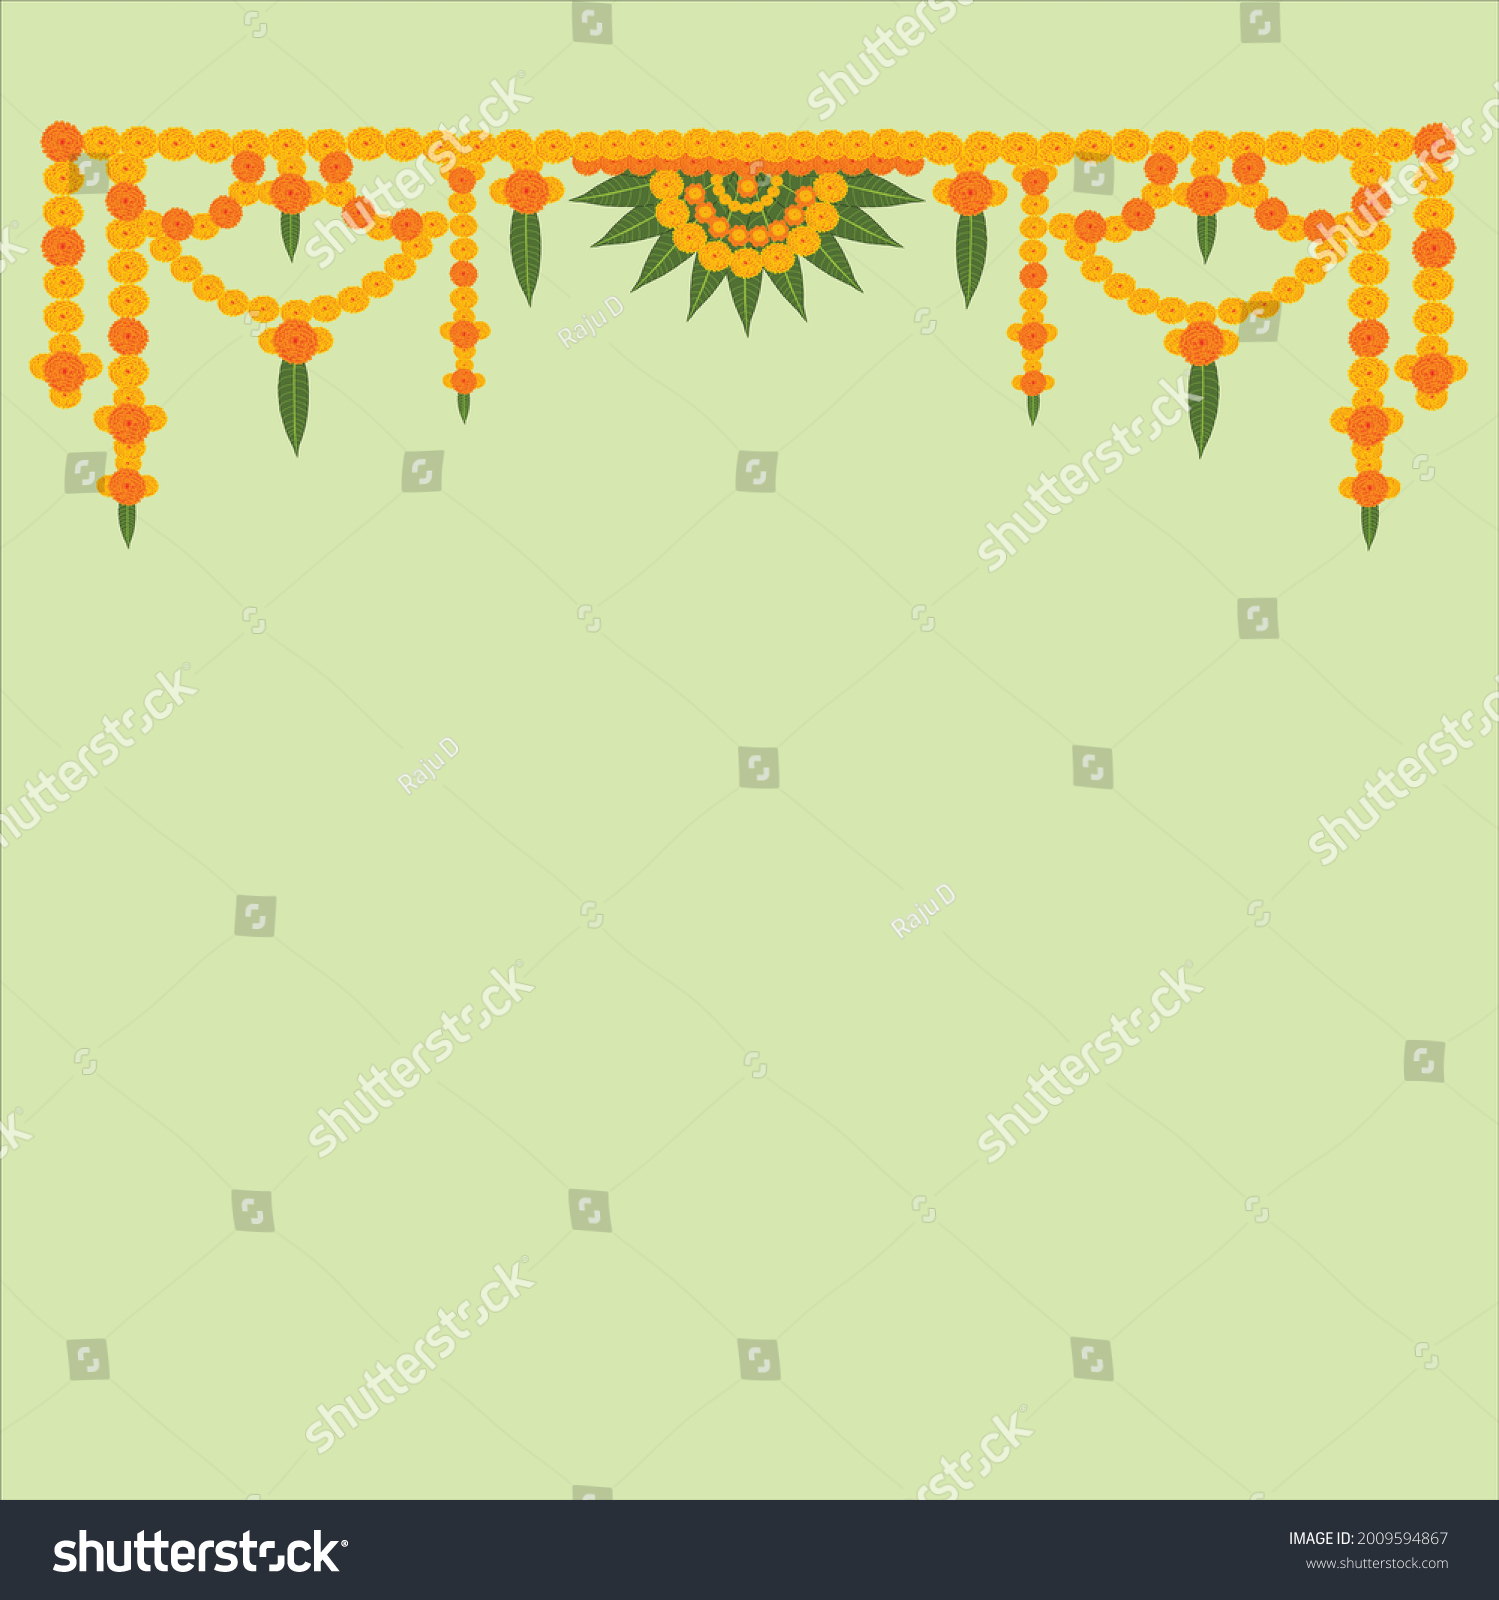 Welcome floral decoration hanging marigold flowers in yellow and orange color with mango leaves on light green color background. #2009594867